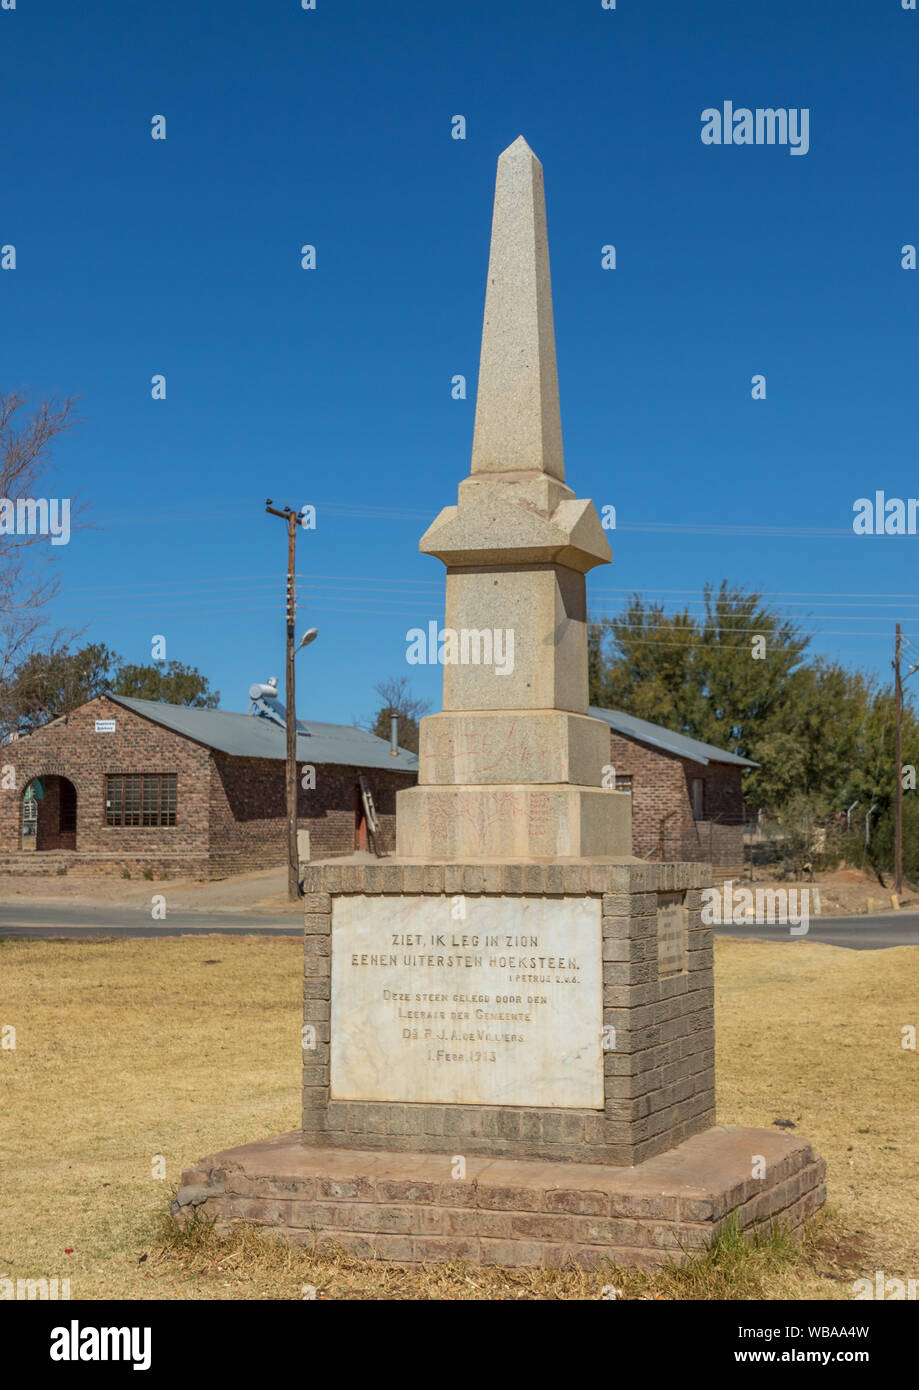 Hopetown, South Africa - cornerstone of the Dutch Reformed Church and Plague commemorating the translation of the bible in Afrikaans in 1933 Stock Photo